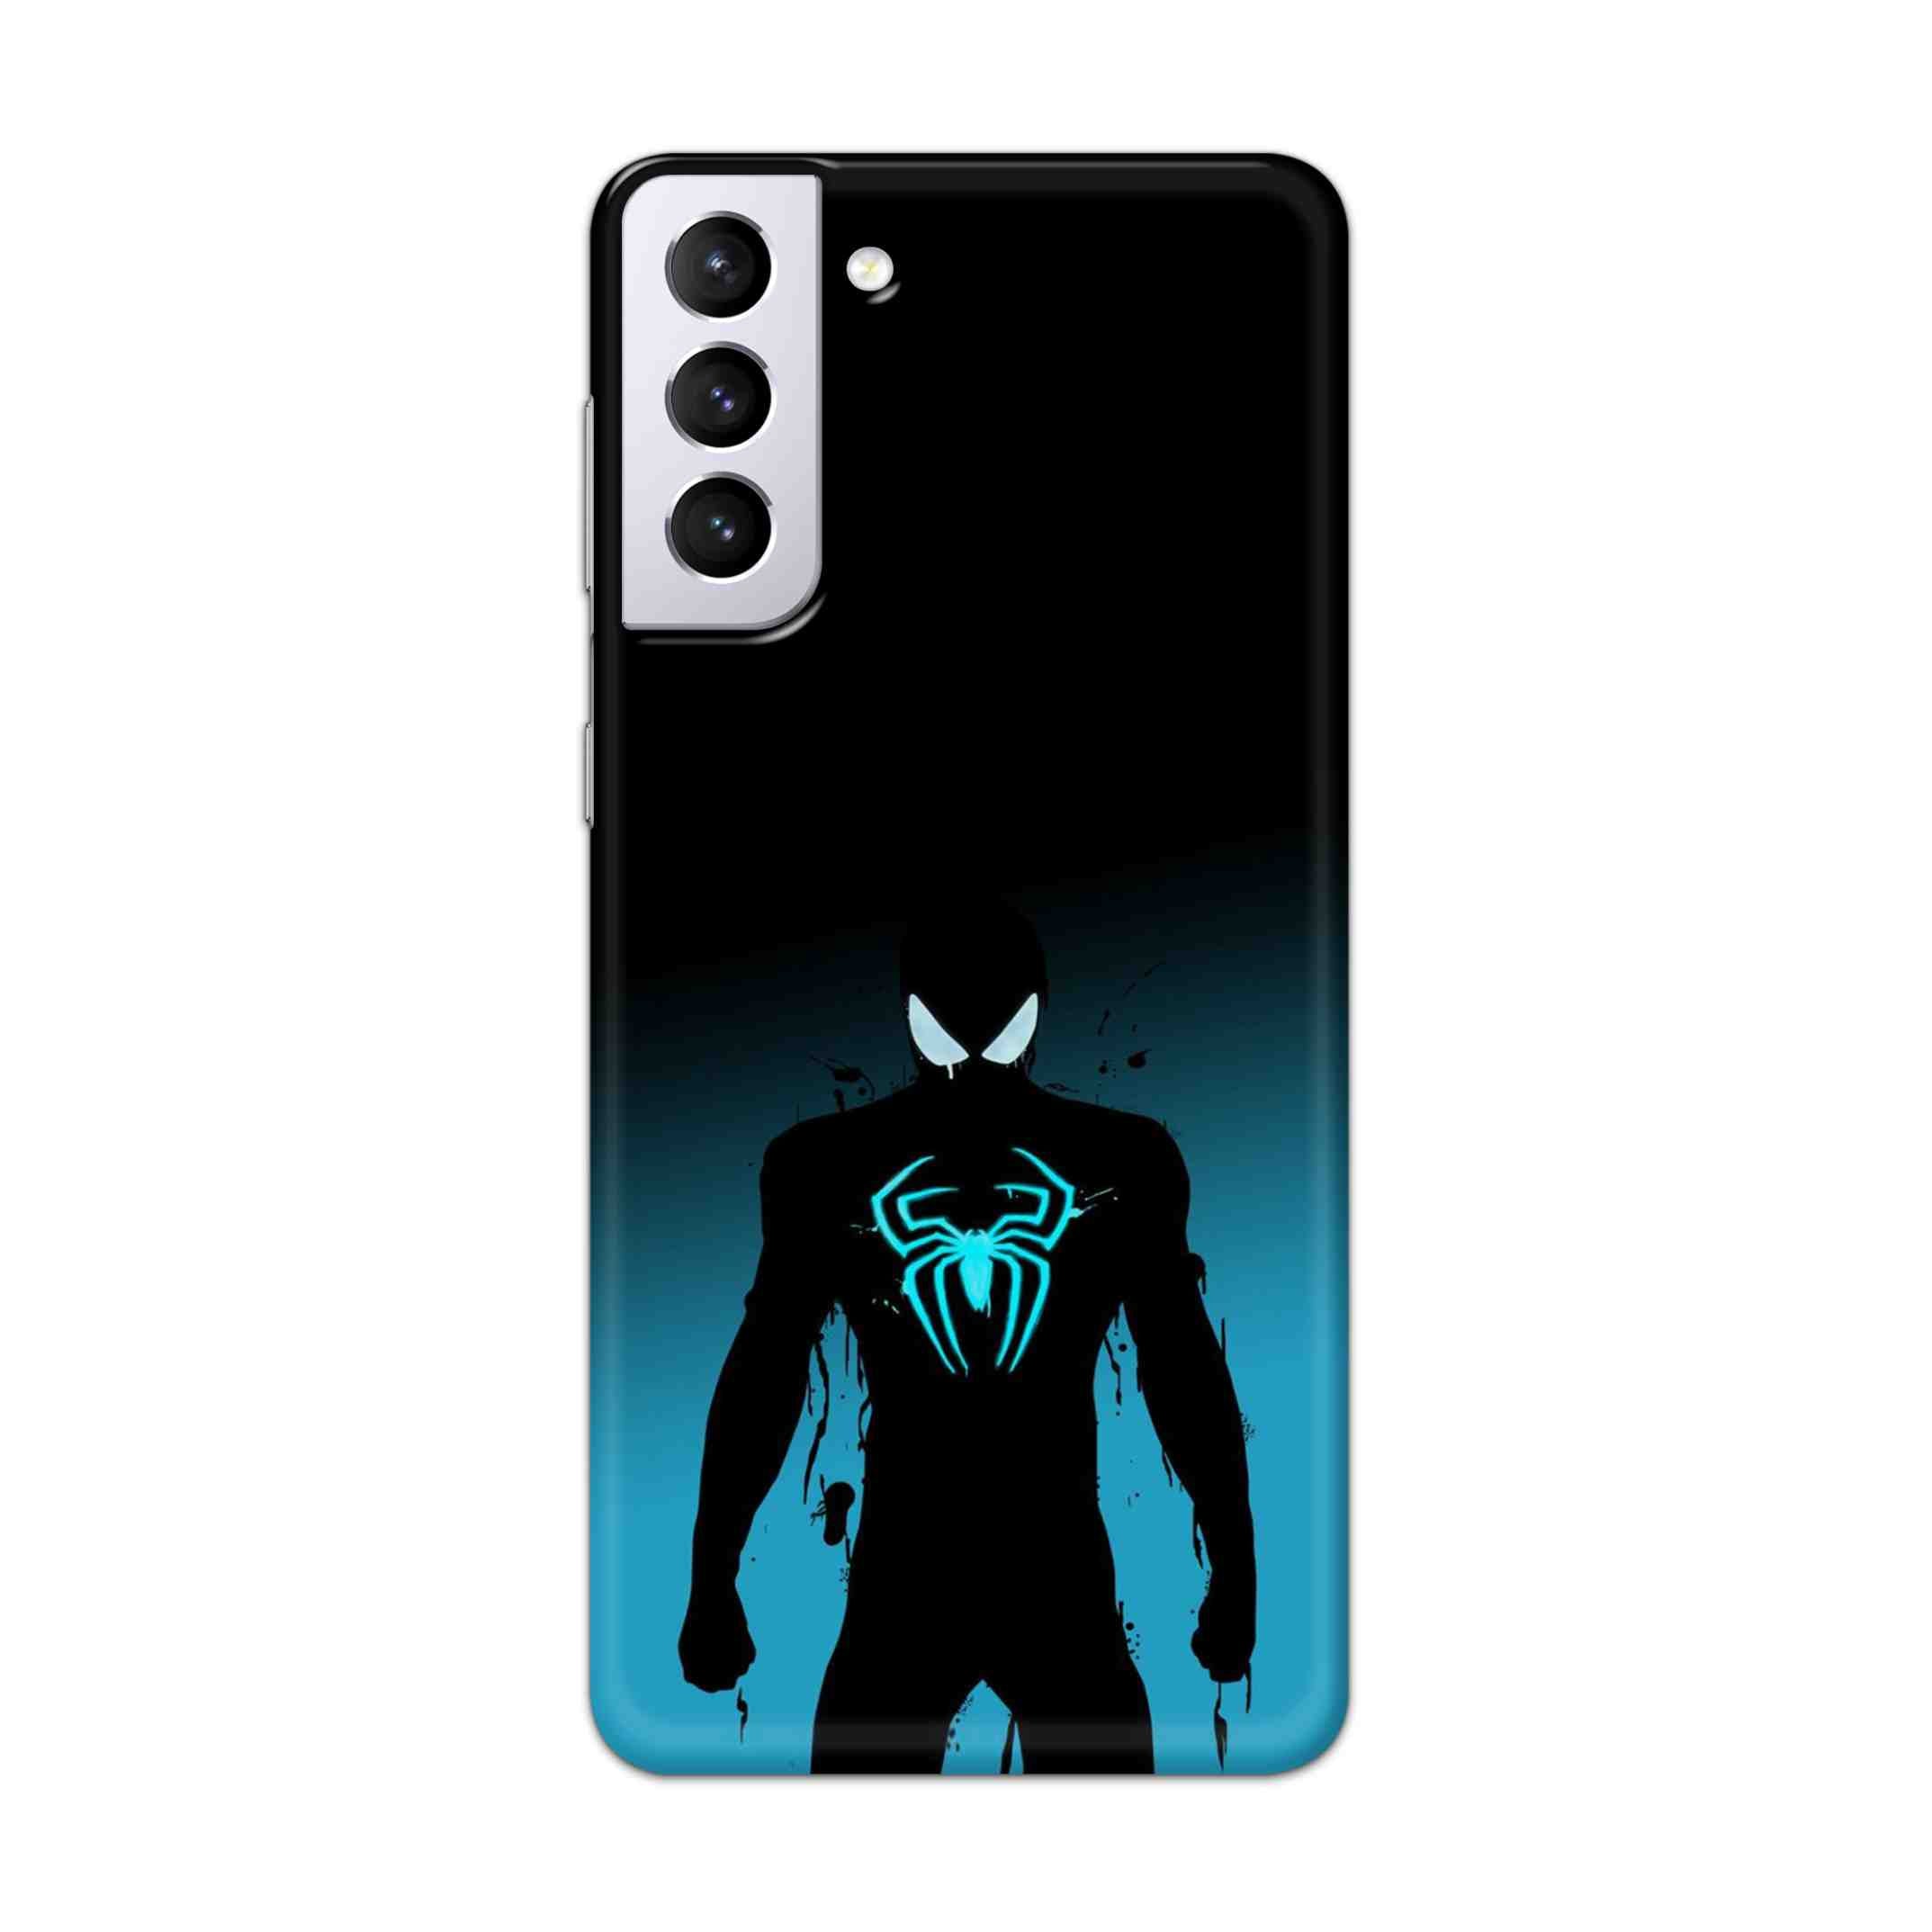 Buy Neon Spiderman Hard Back Mobile Phone Case Cover For Samsung Galaxy S21 Plus Online